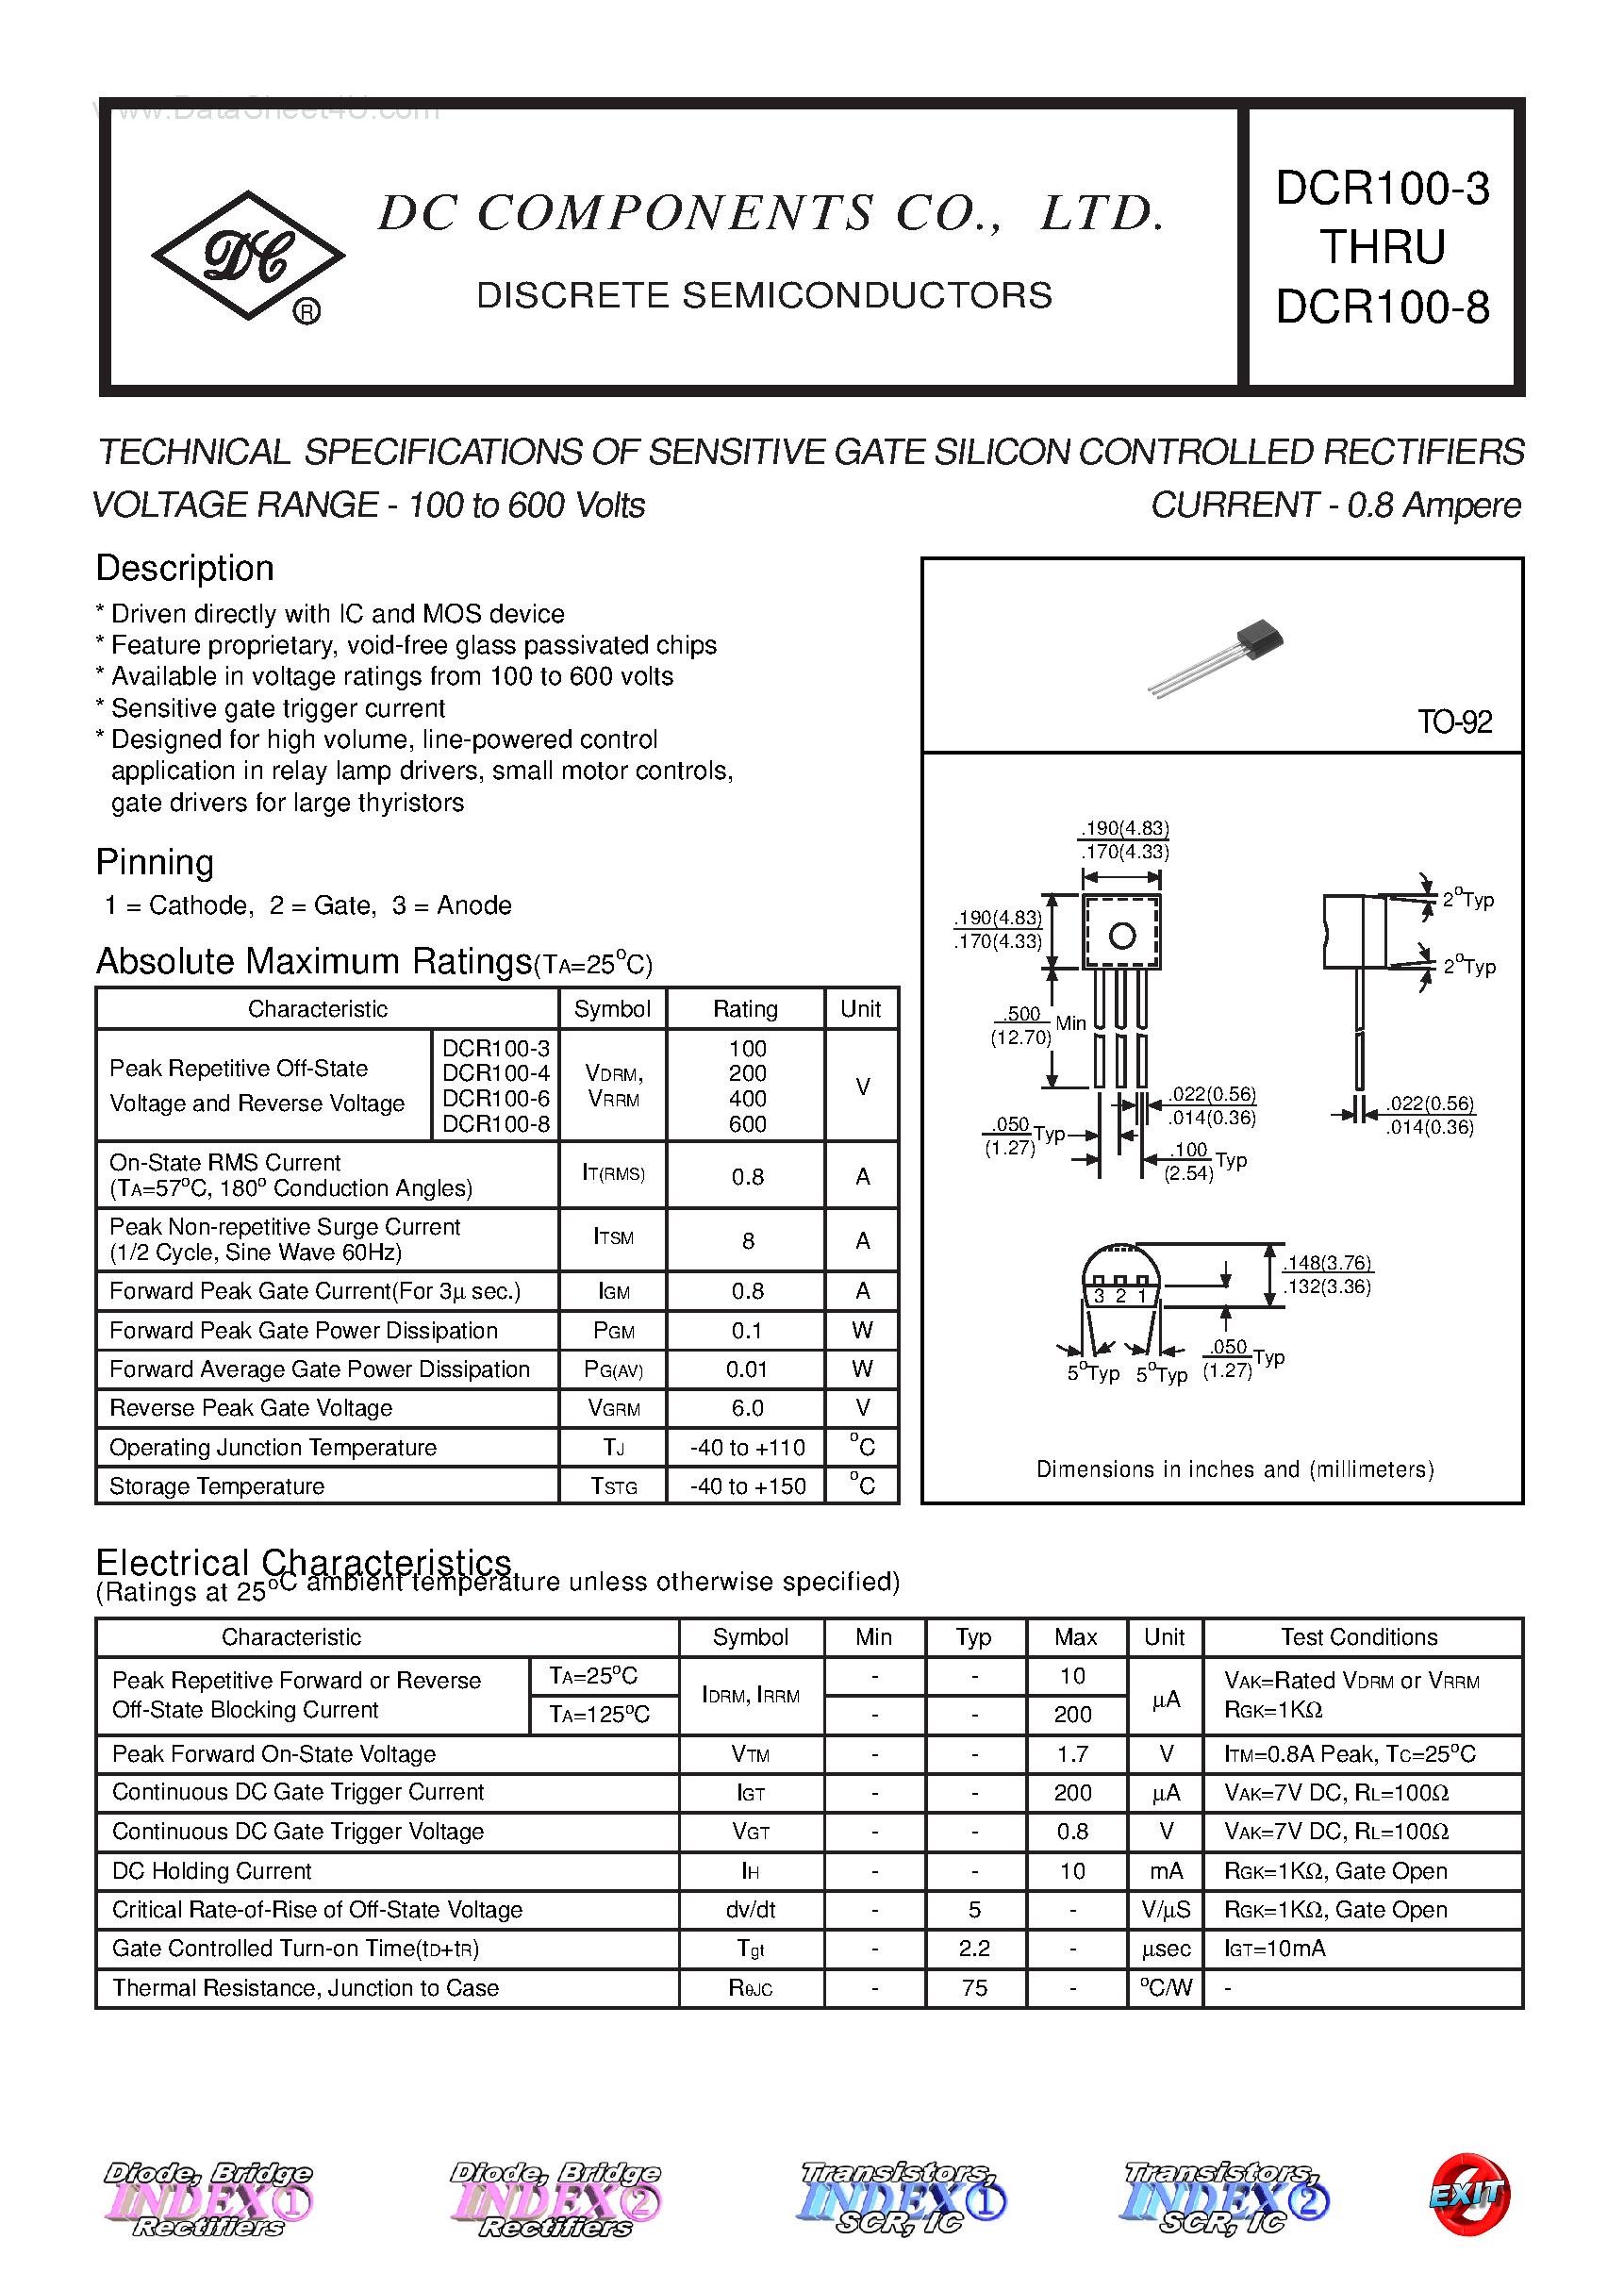 Даташит DCR100-3 - (DCR100-3 - DCR100-8) TECHNICAL SPECIFICATIONS OF SENSITIVE GATE SILICON CONTROLLED RECTIFIERS страница 1